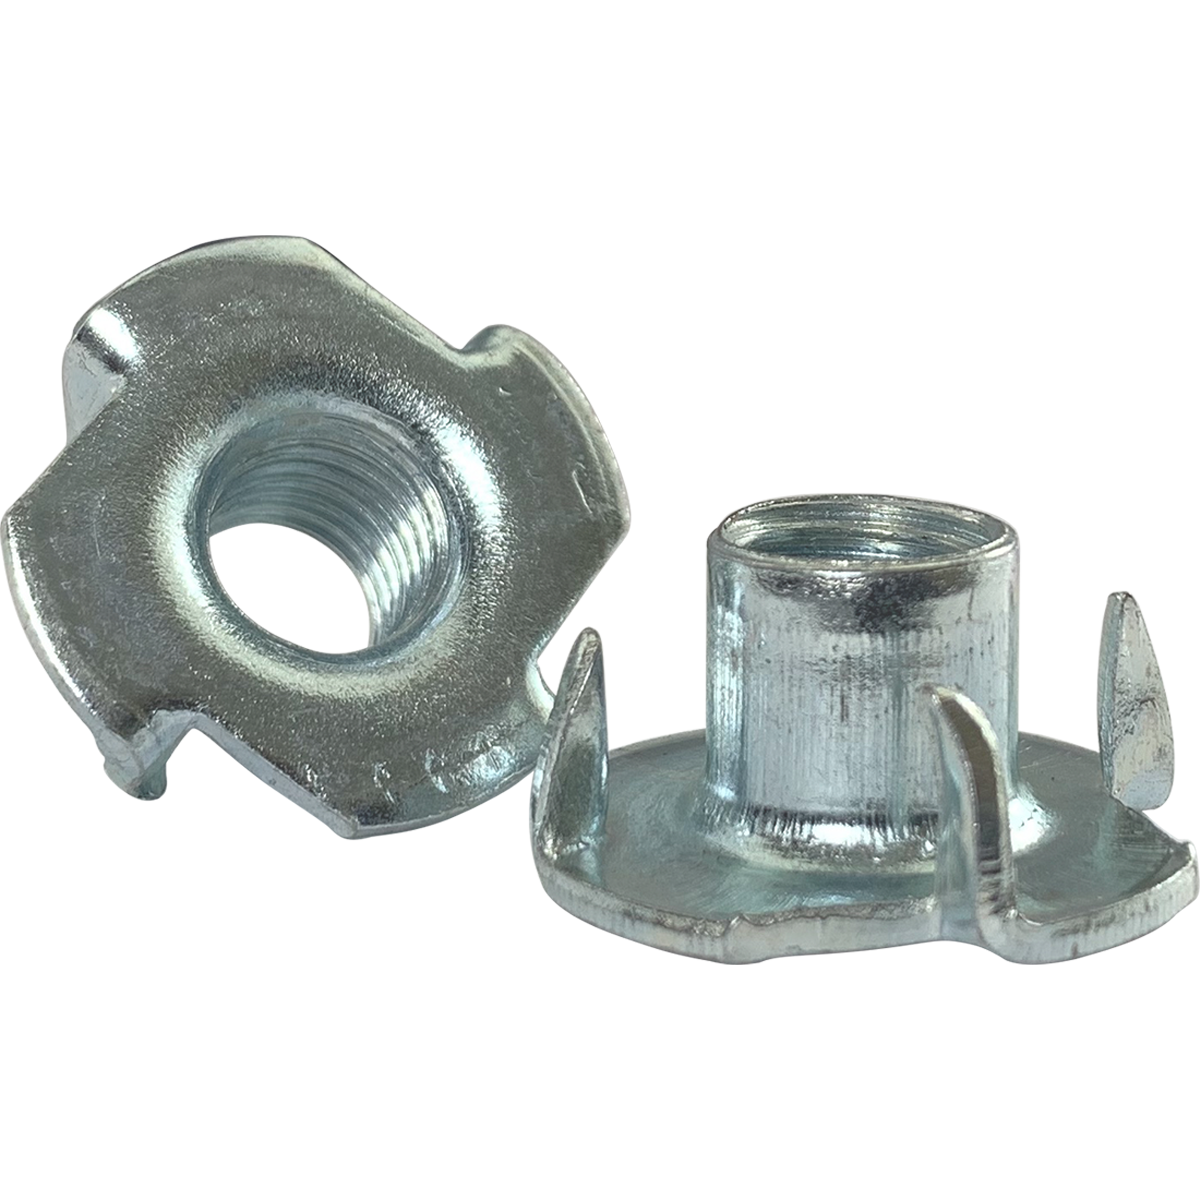 BZP - Bright Zinc Plated 4-prong Tee Nuts available in various diameters and at competitive prices